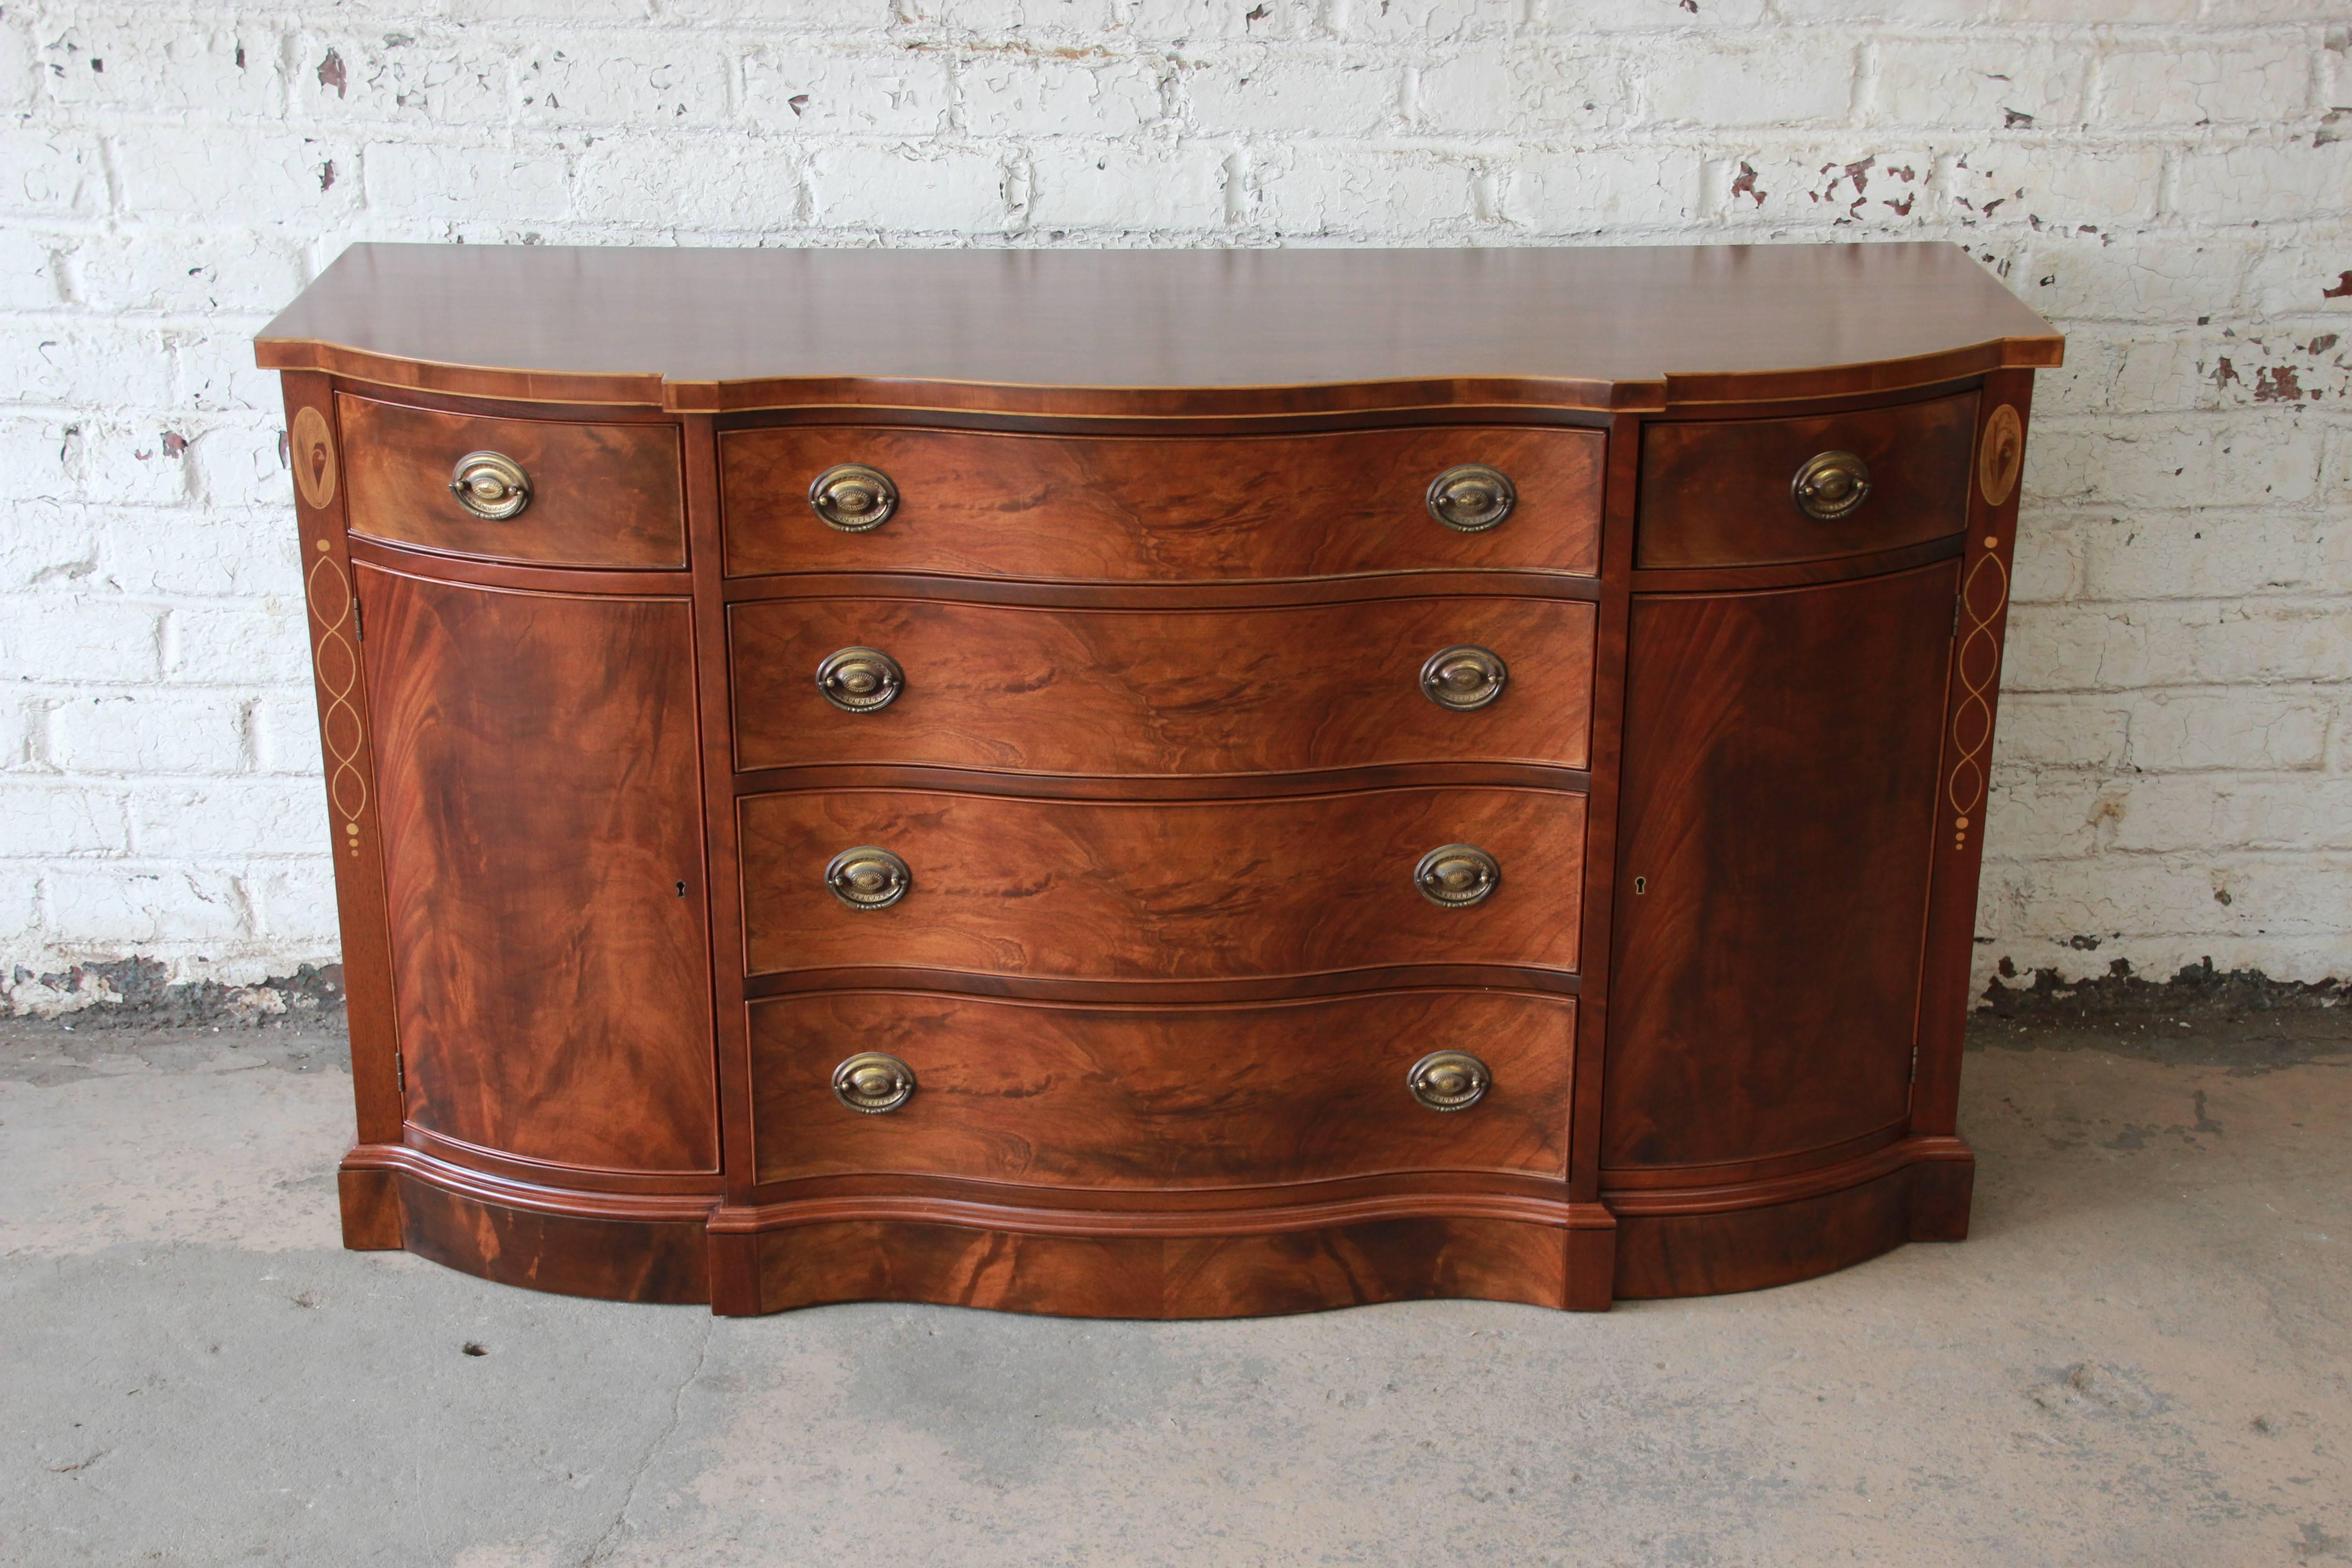 Offering a beautiful sideboard buffet by Drexel Furniture. This piece is part of the Wallace Nutting collection and has beautiful inlaid details with stunning wood grain that makes this a statement piece to any home. The piece feature s four large